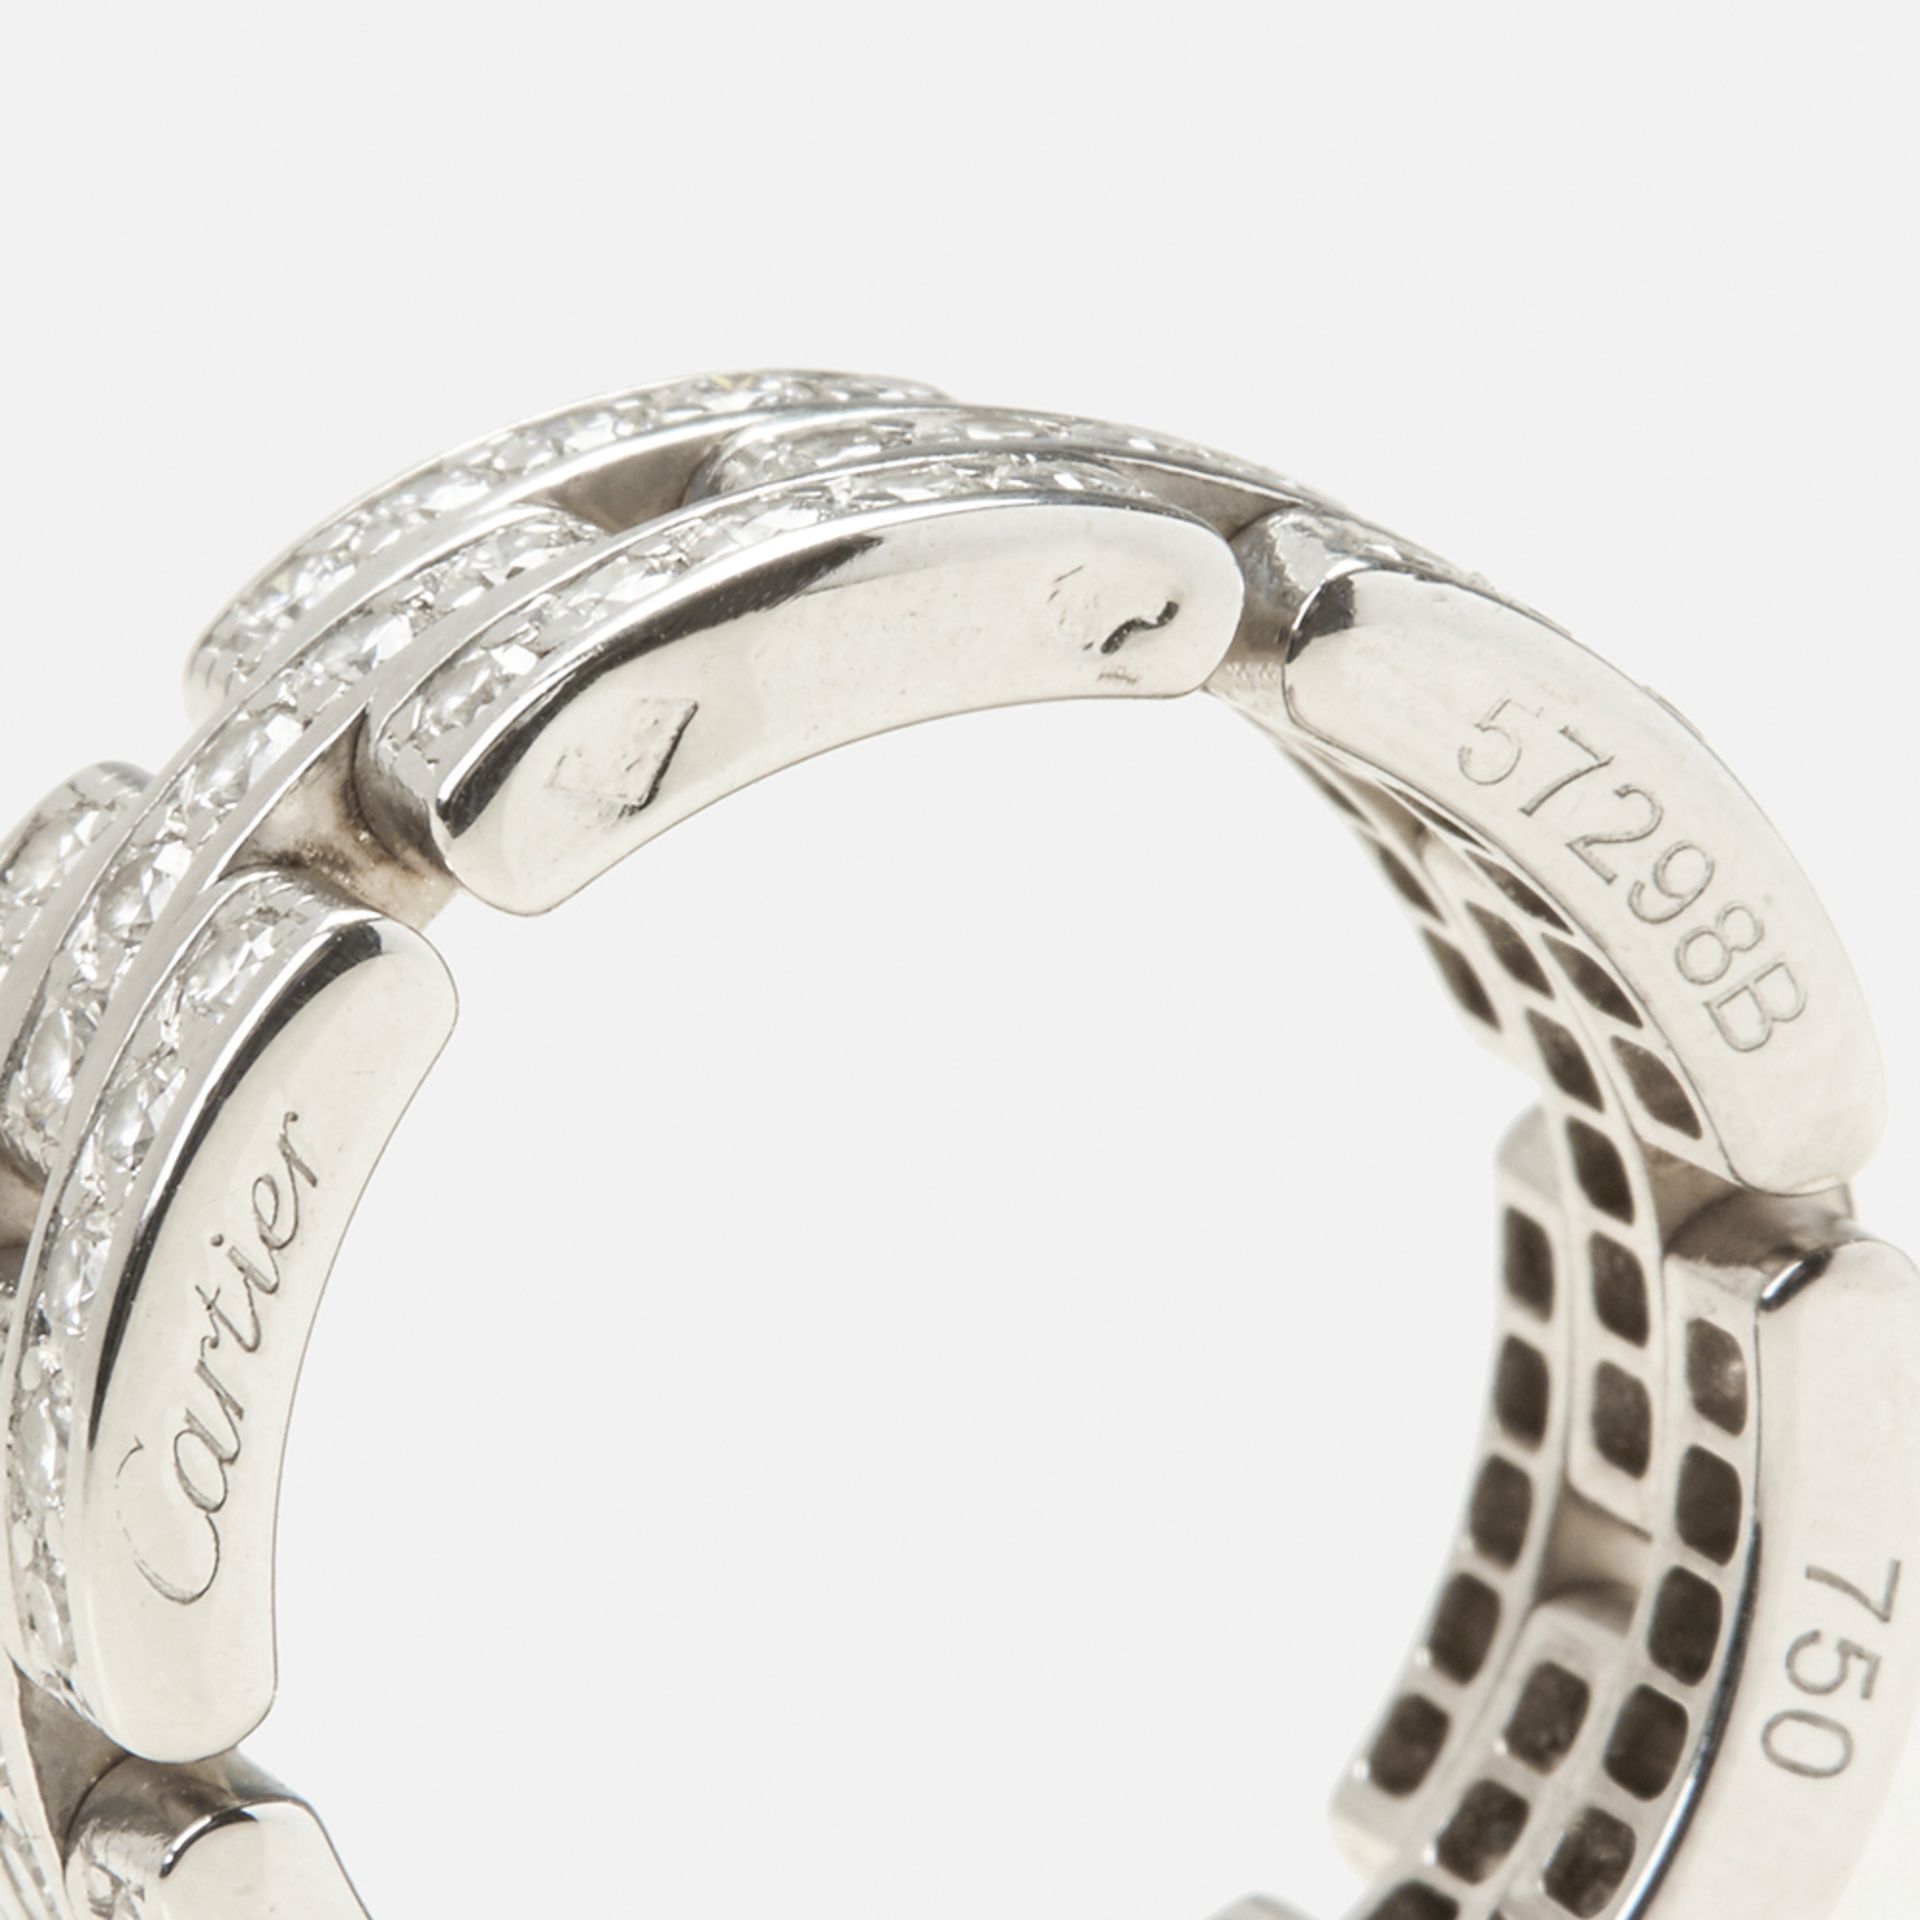 Cartier, 18k White Gold Diamond Maillon Ring - Image 7 of 9